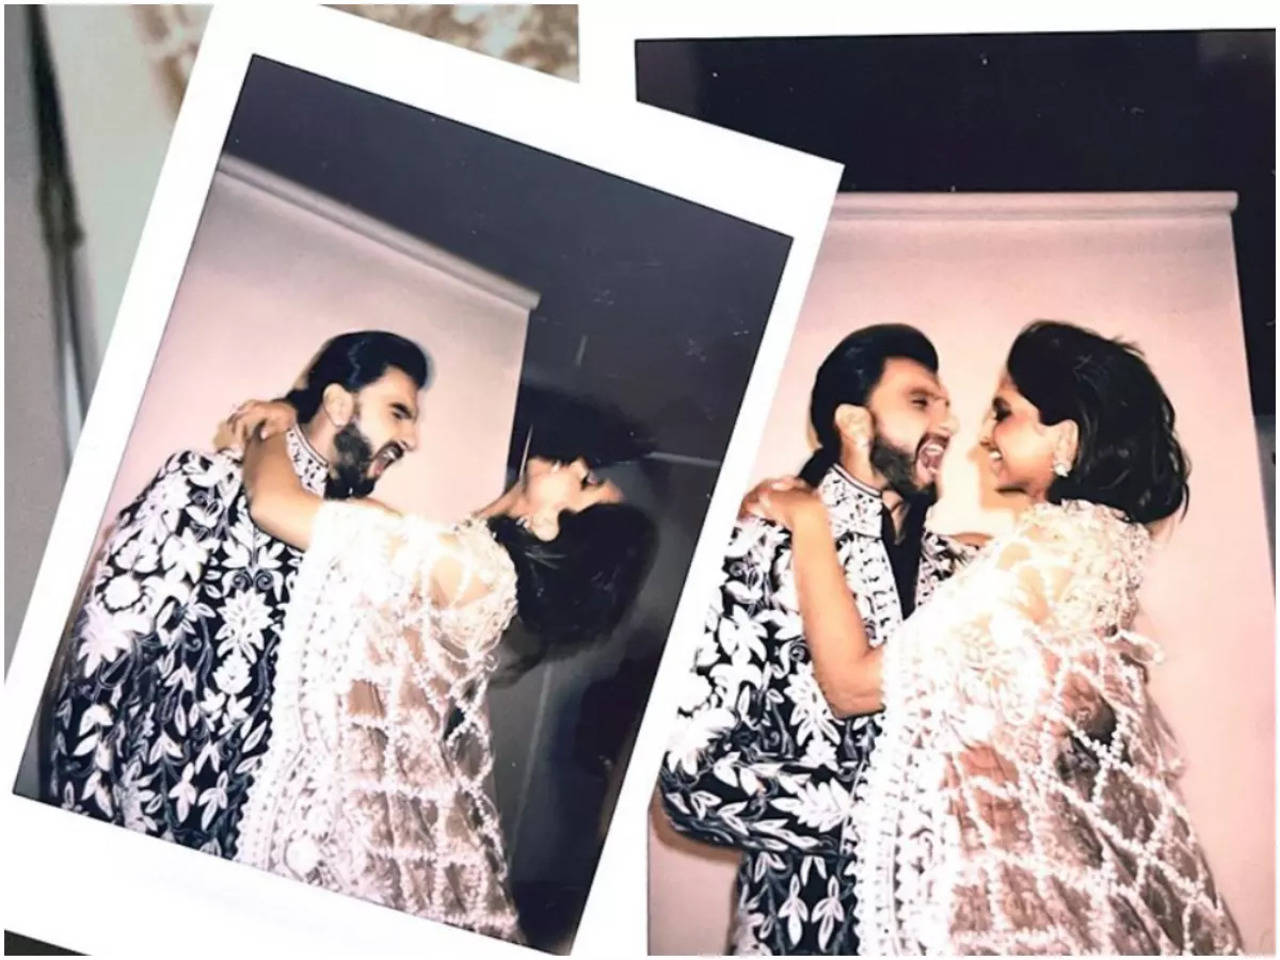 Ranveer Singh calls Deepika Padukone 'my queen'; shares throwback photo  from Cannes posing with her poster while shutting down separation rumours :  Bollywood News - Bollywood Hungama